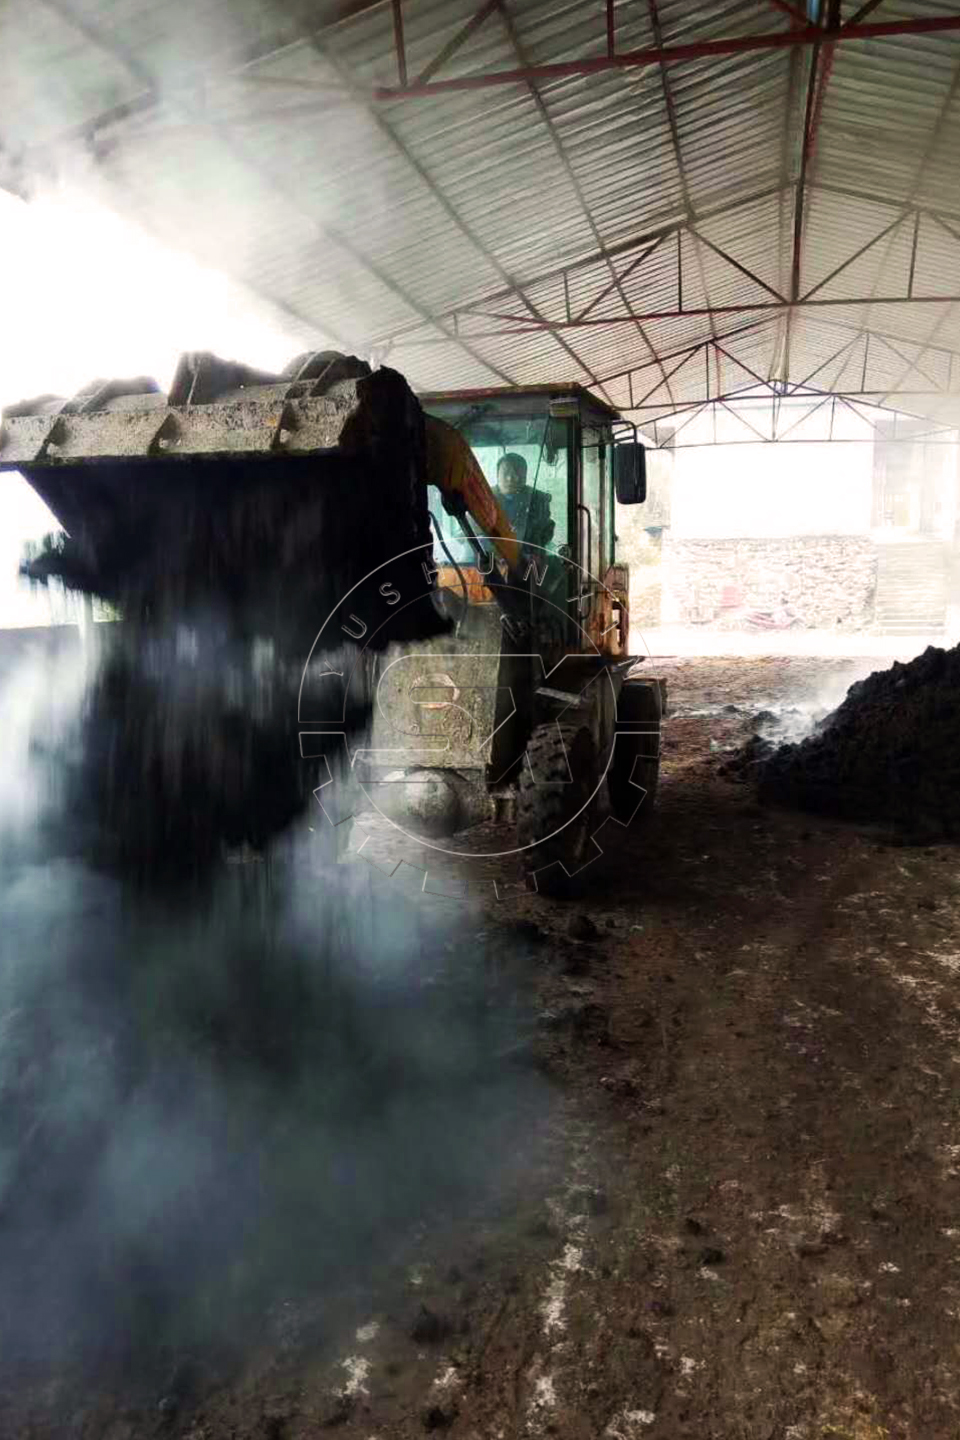 The Composting in Fertilizer Making Plant